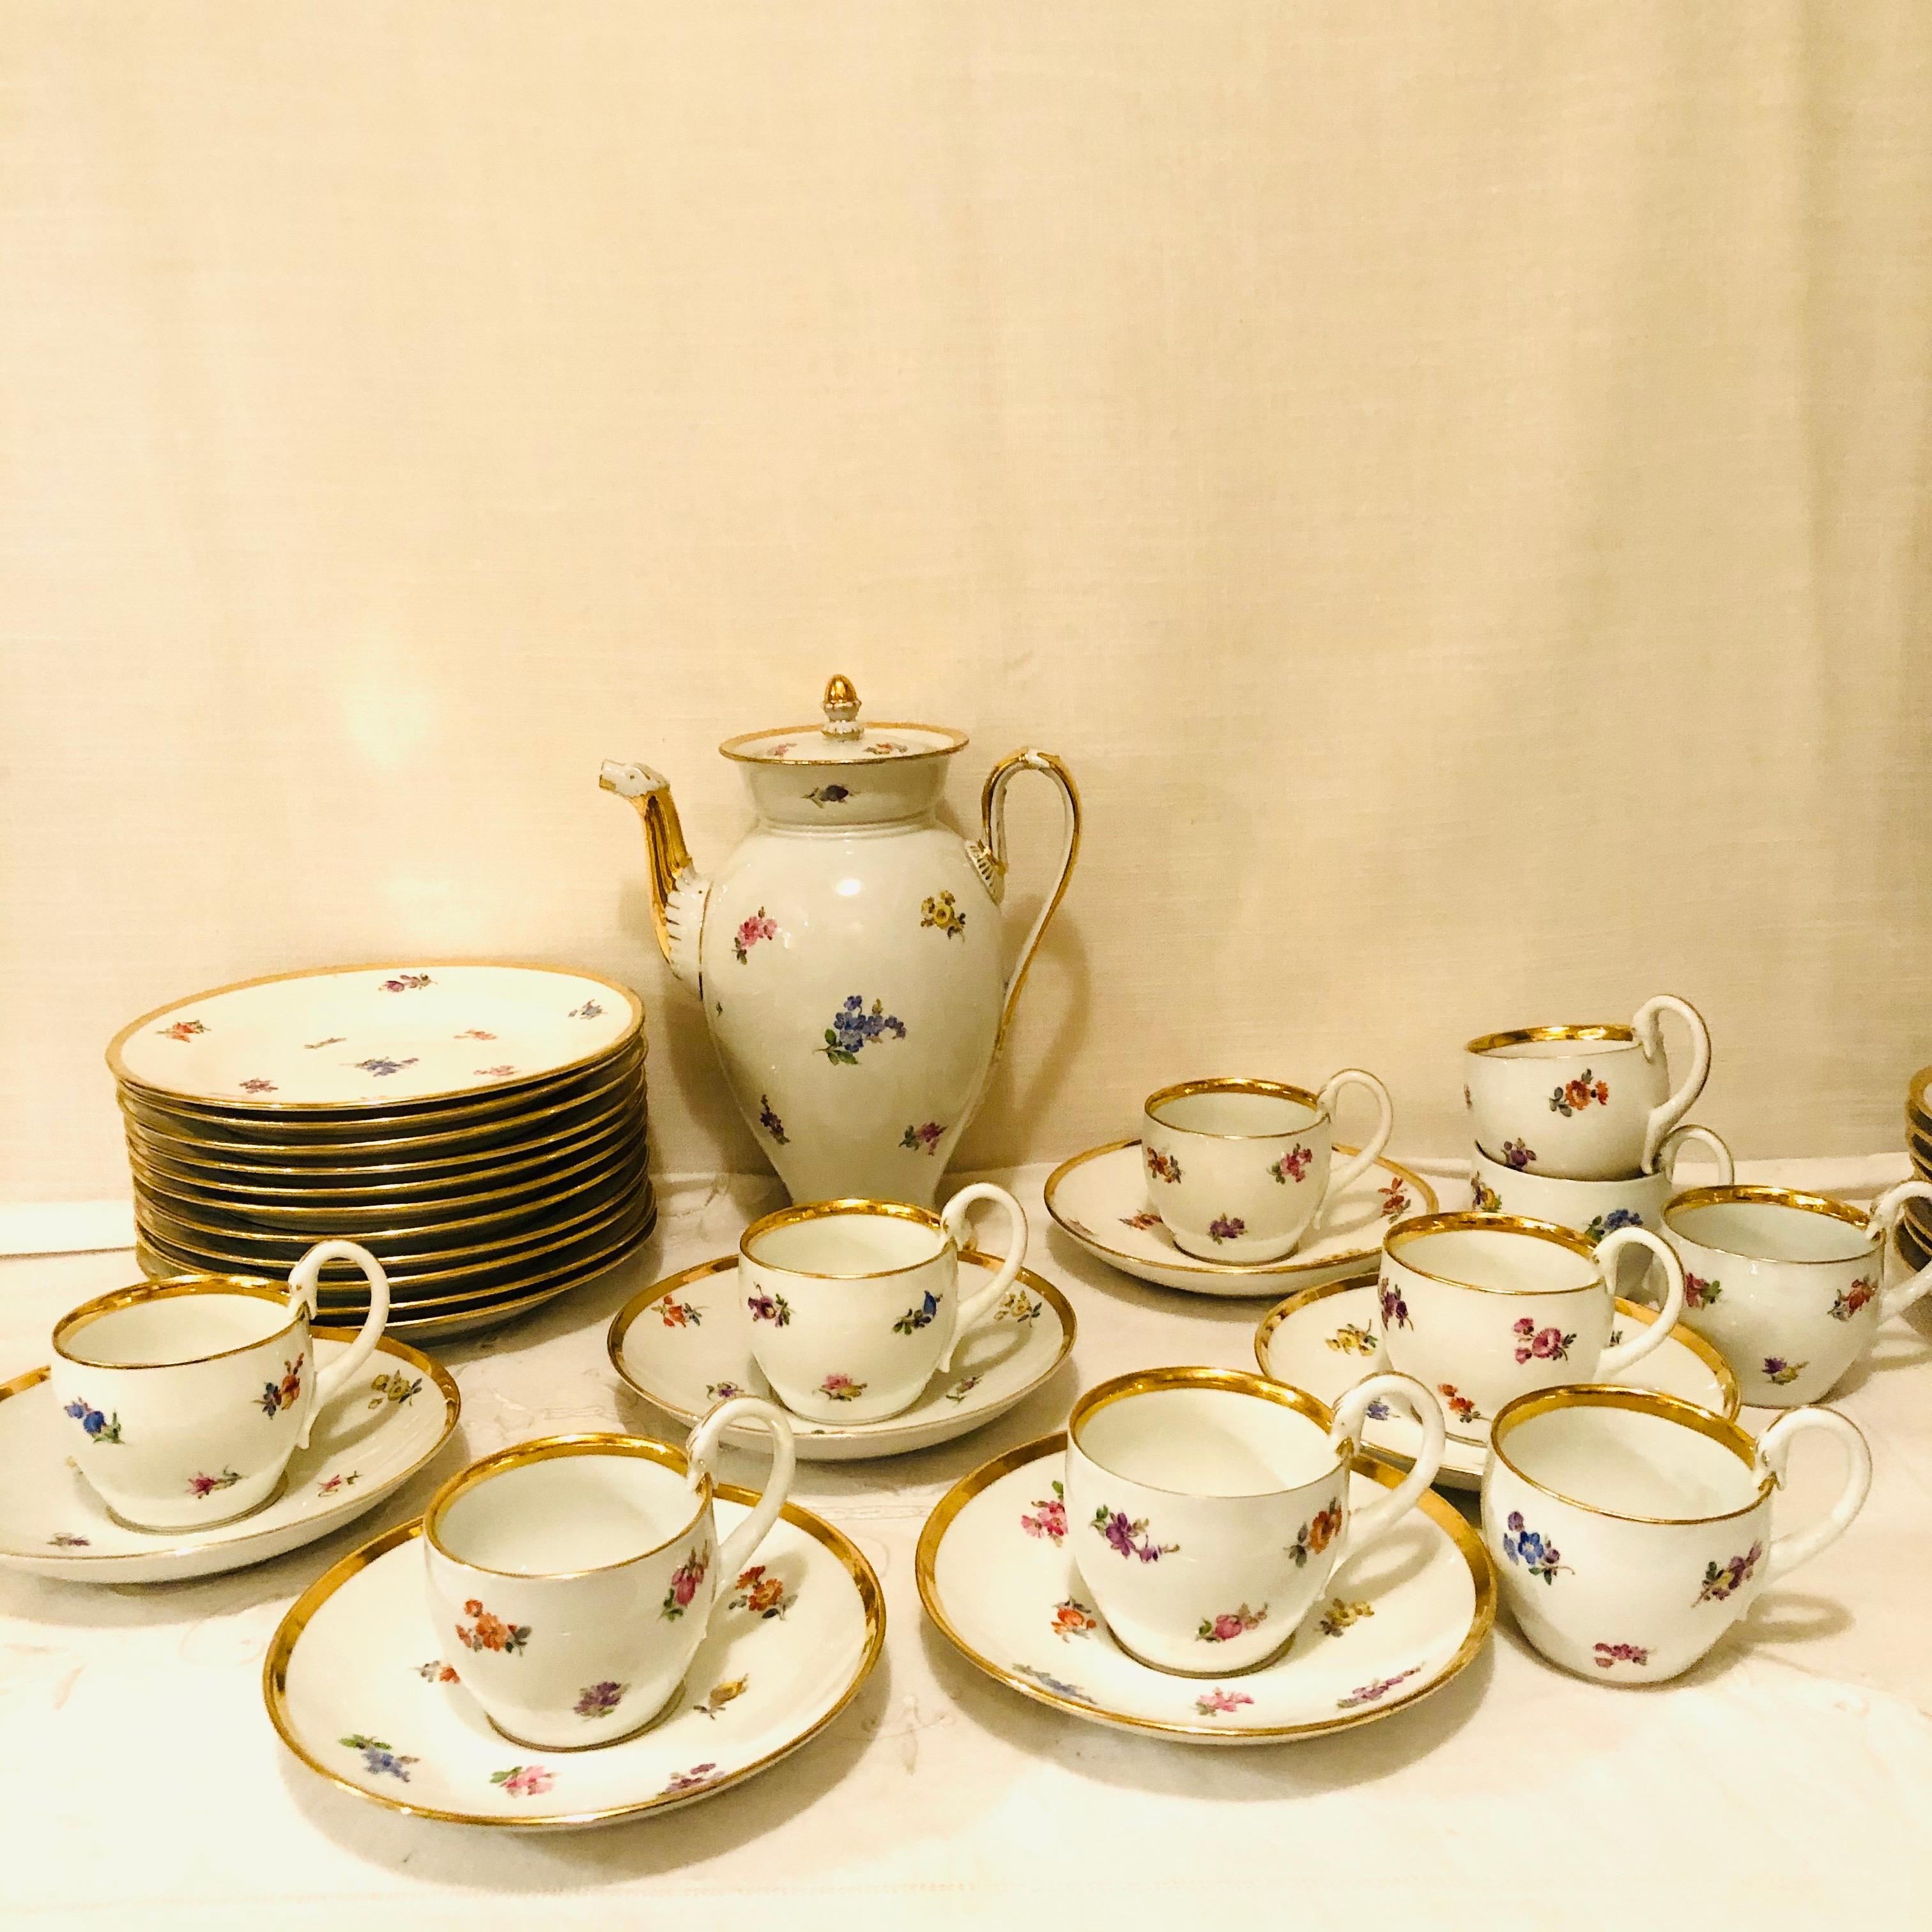 Mid-20th Century Meissen Streublumen Tea Set for 10 with Cups and Saucers, Cake Plates and Teapot